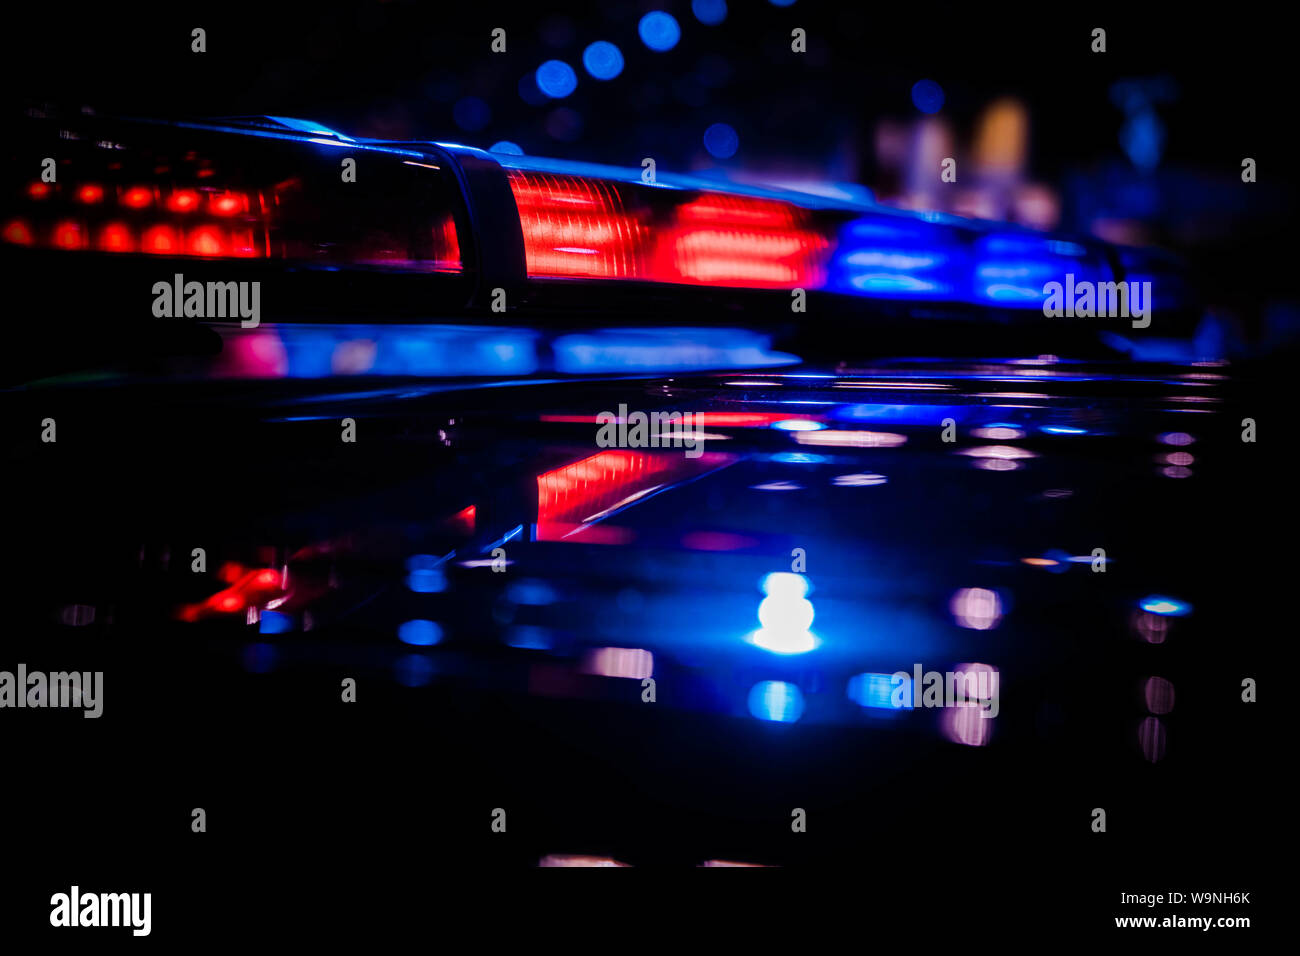 Emergency warning red and blue roof mounted police LED blinker light bar  turned on Stock Photo - Alamy